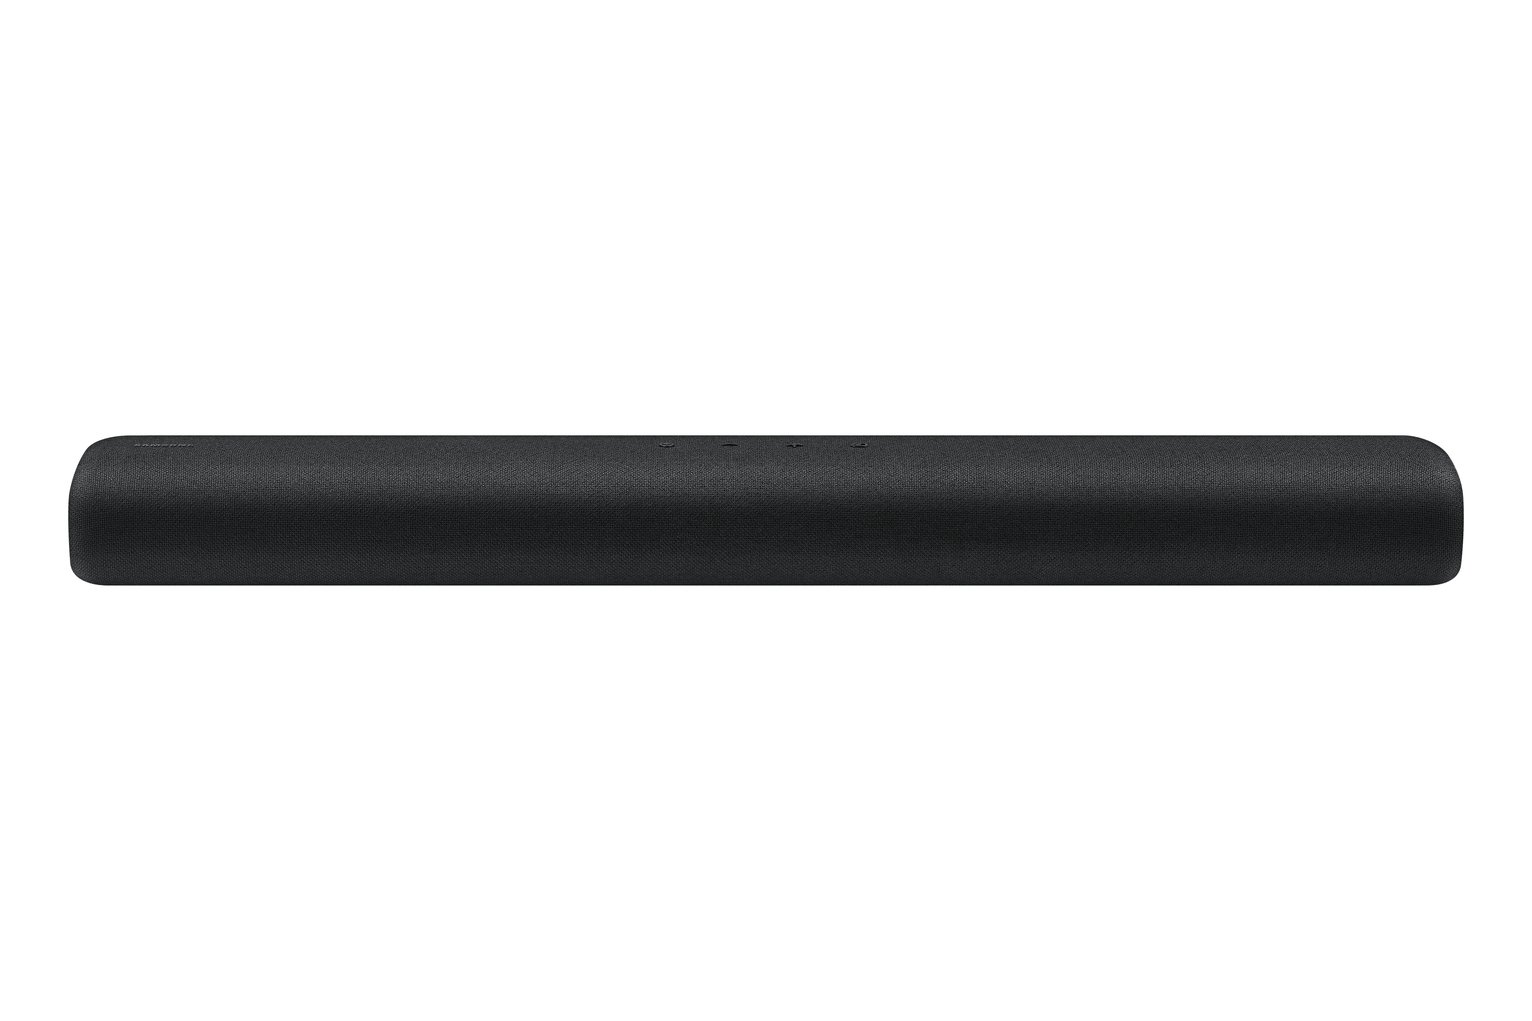 Samsung HW-S40T 2Ch All-In-One Sound Bar Review